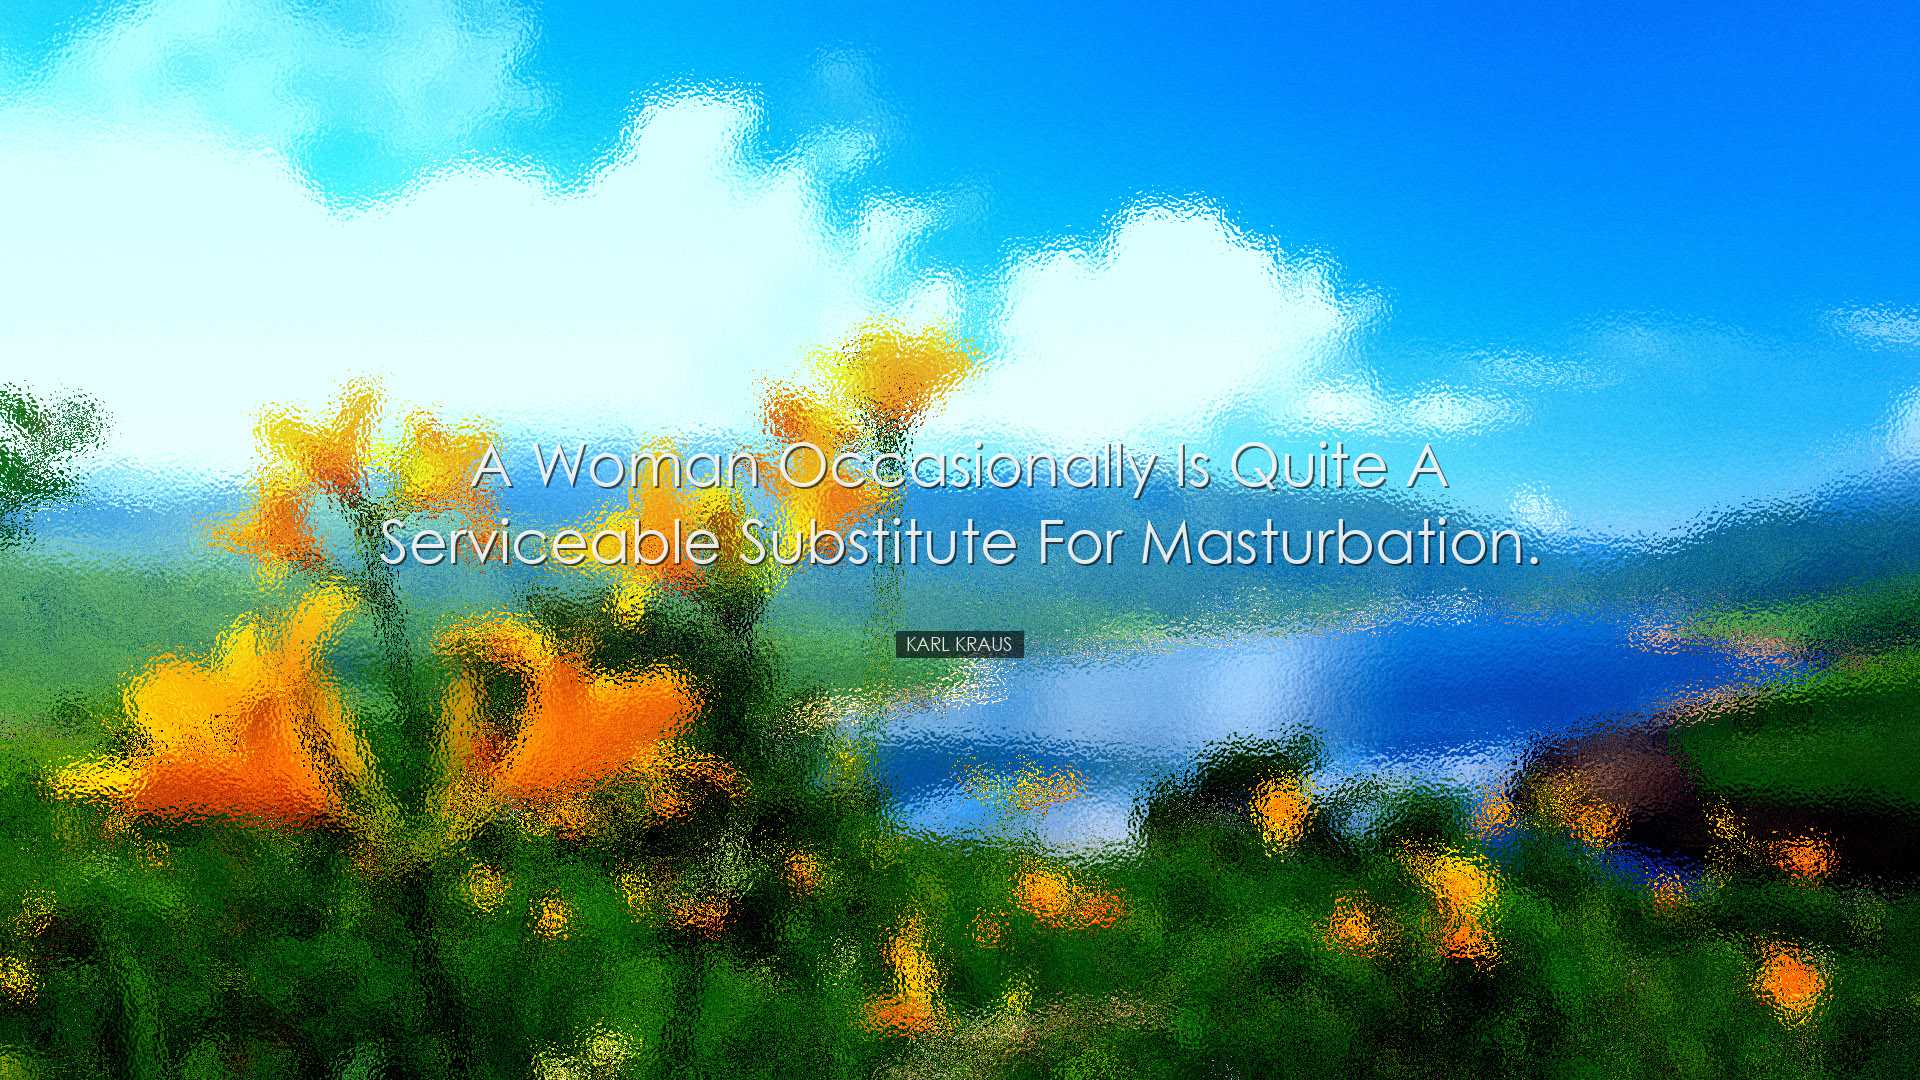 A woman occasionally is quite a serviceable substitute for masturb